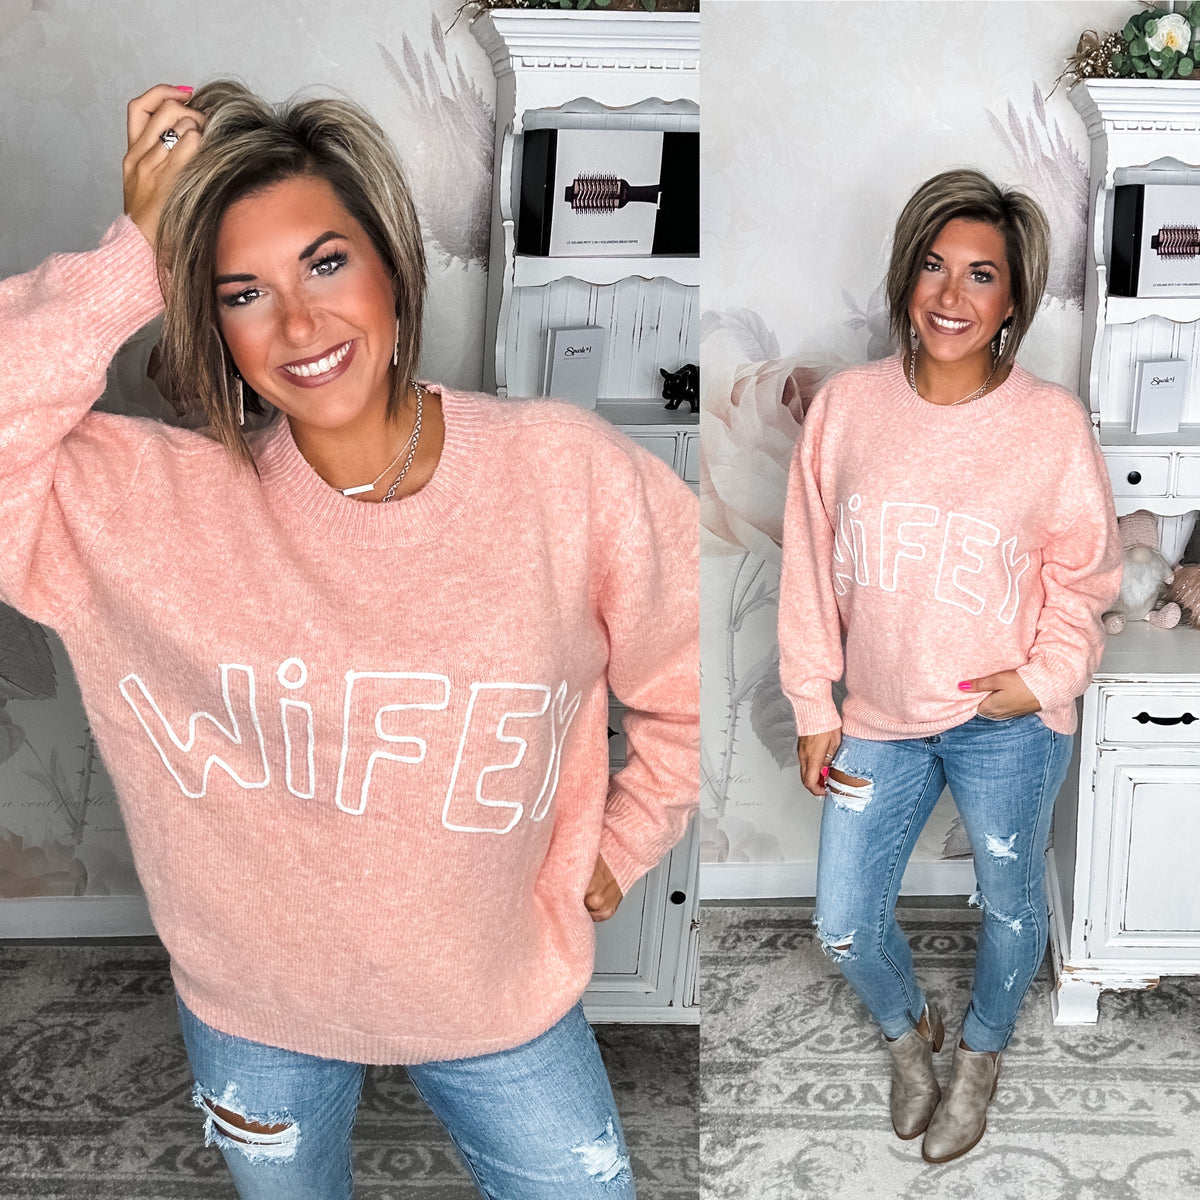 Wifey Heart Embroidered Sweater